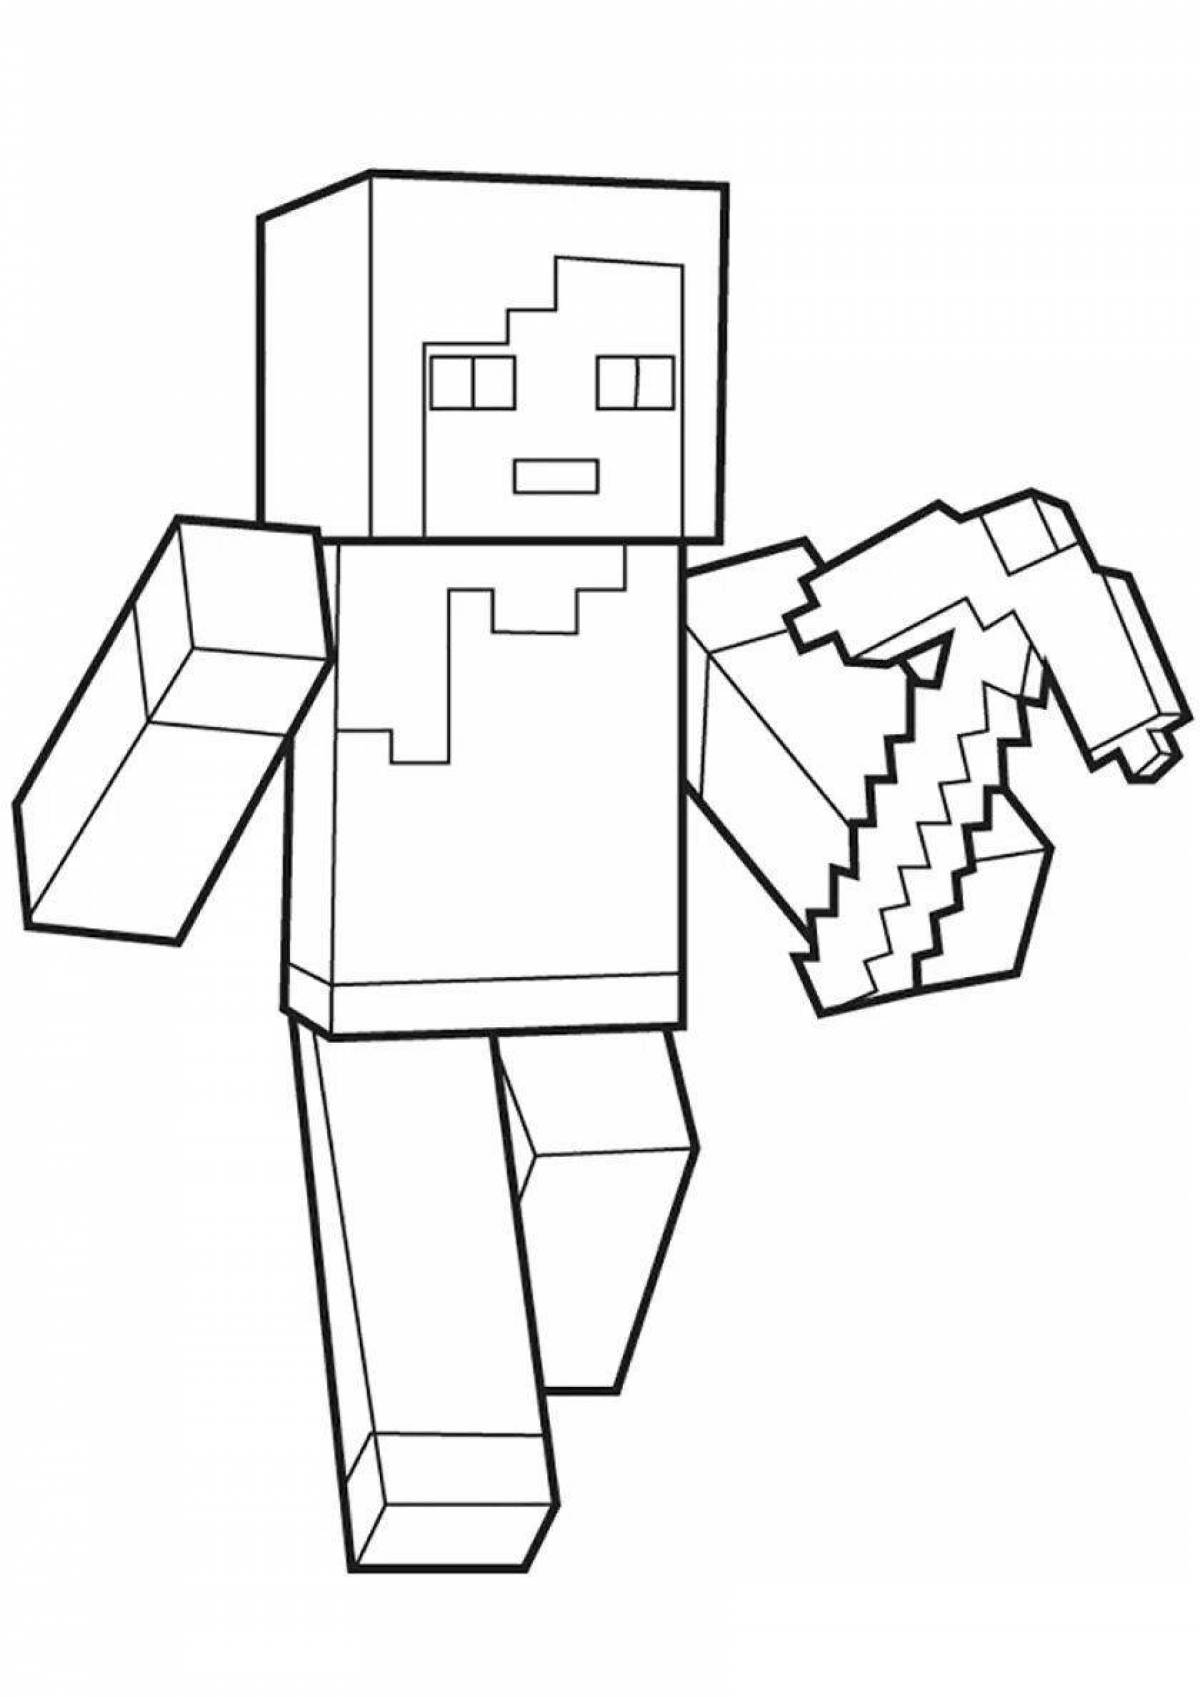 Creative minecraft player coloring page